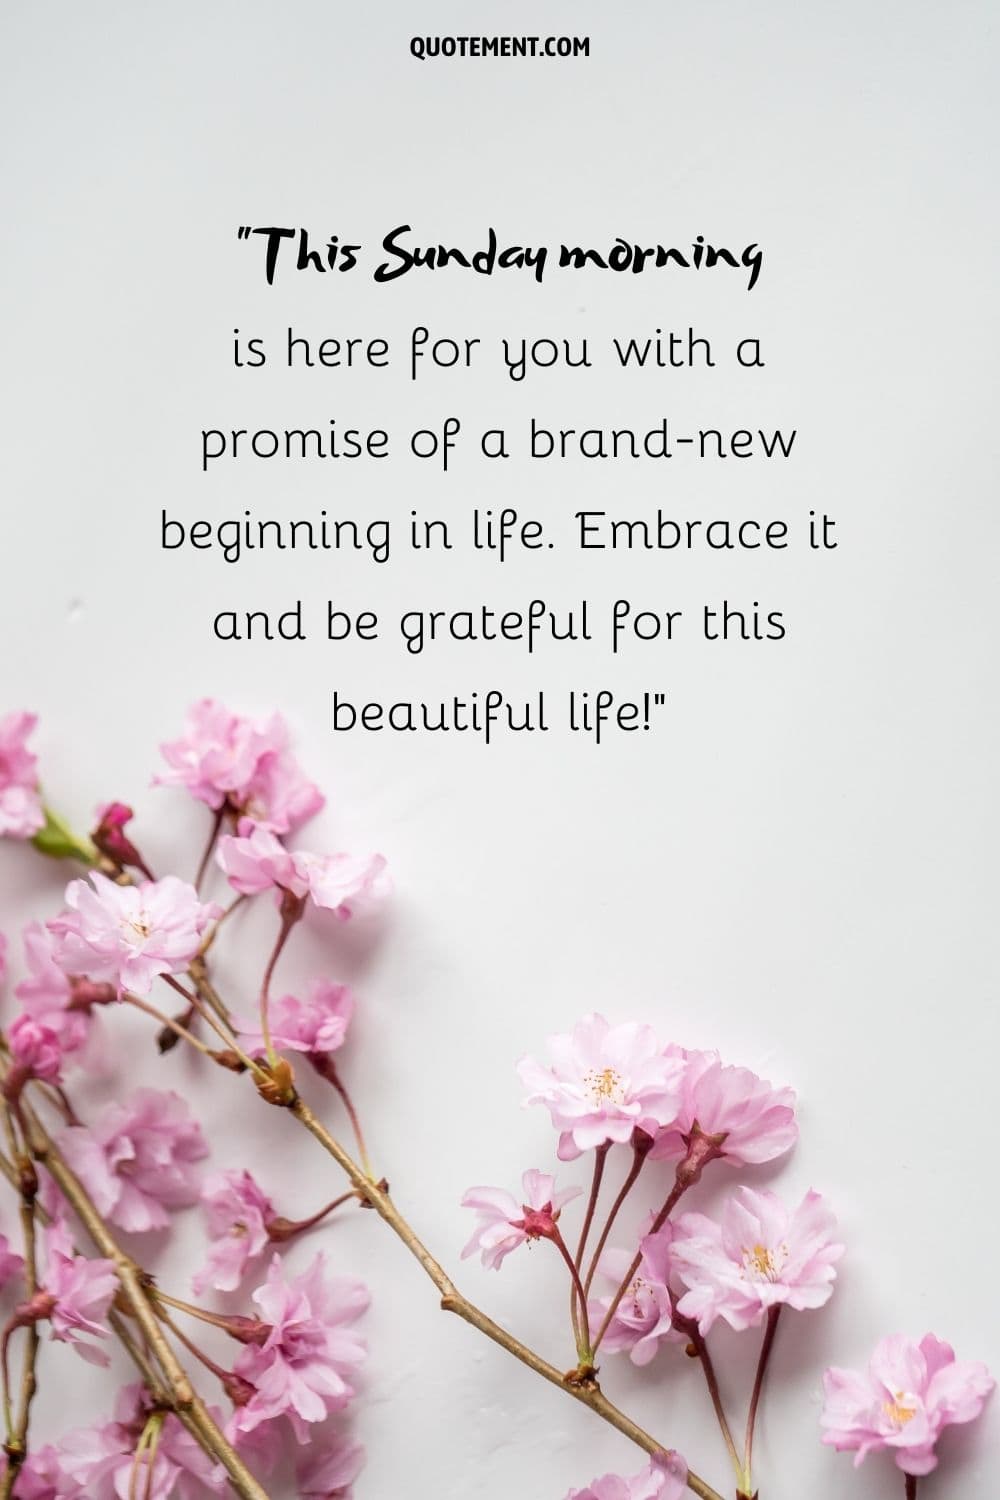 a bunch of small pink flowers representing sunday good morning image with quote